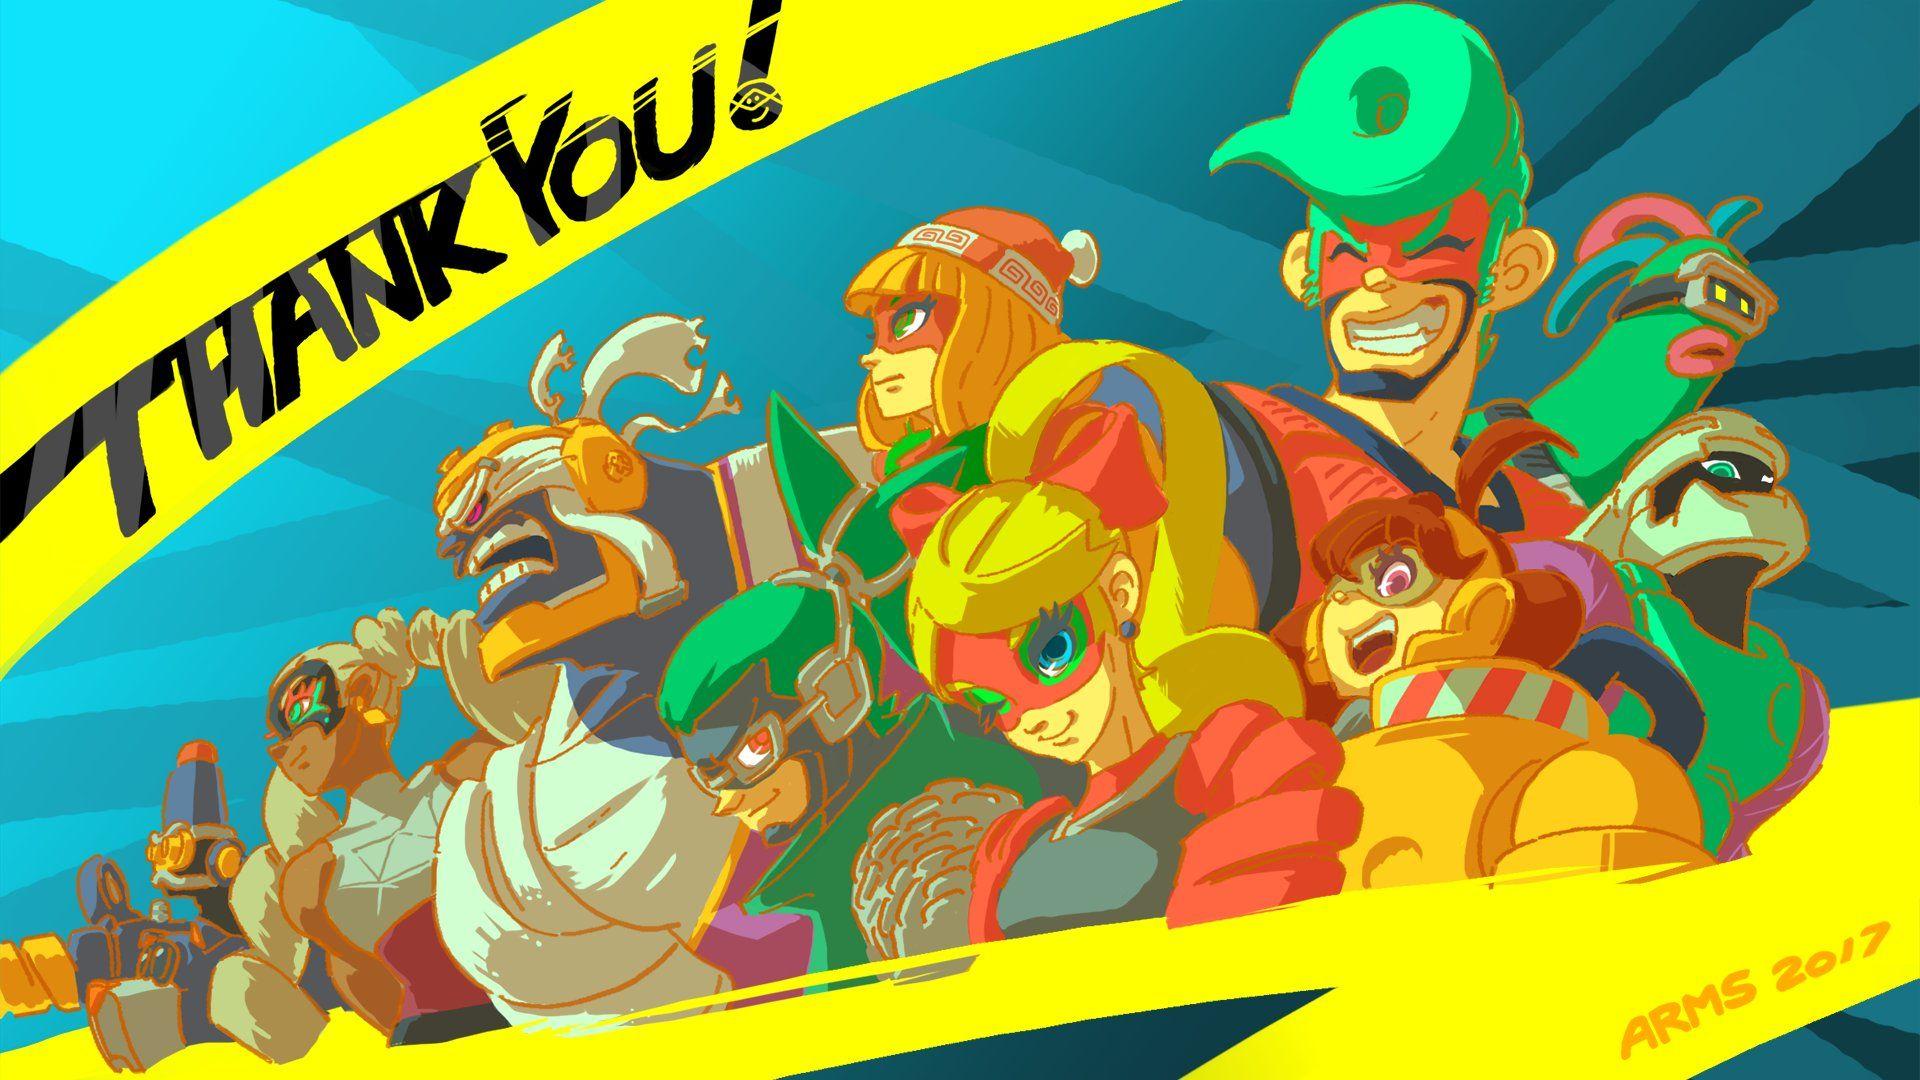 ARMS: Nintendo Minute ARMS Art Contest Winners Revealed